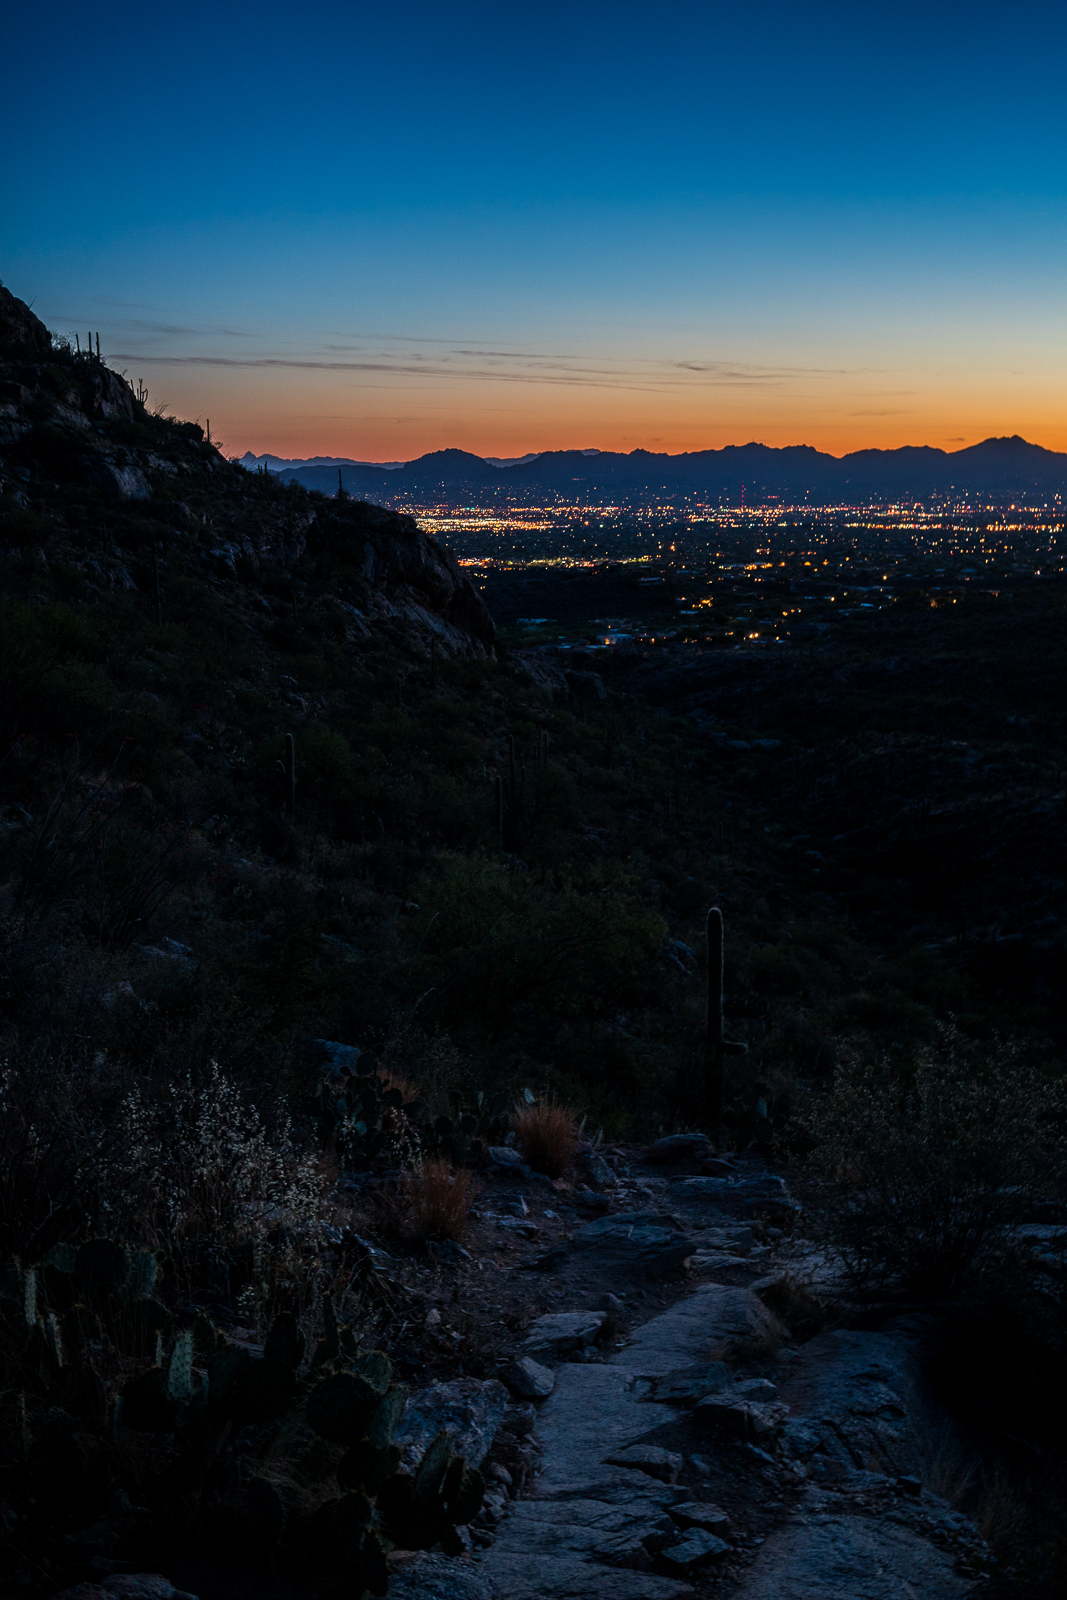 Loosing the light while descending the Pontatoc Ridge Trail - Tucson city lights in background. April 2016.